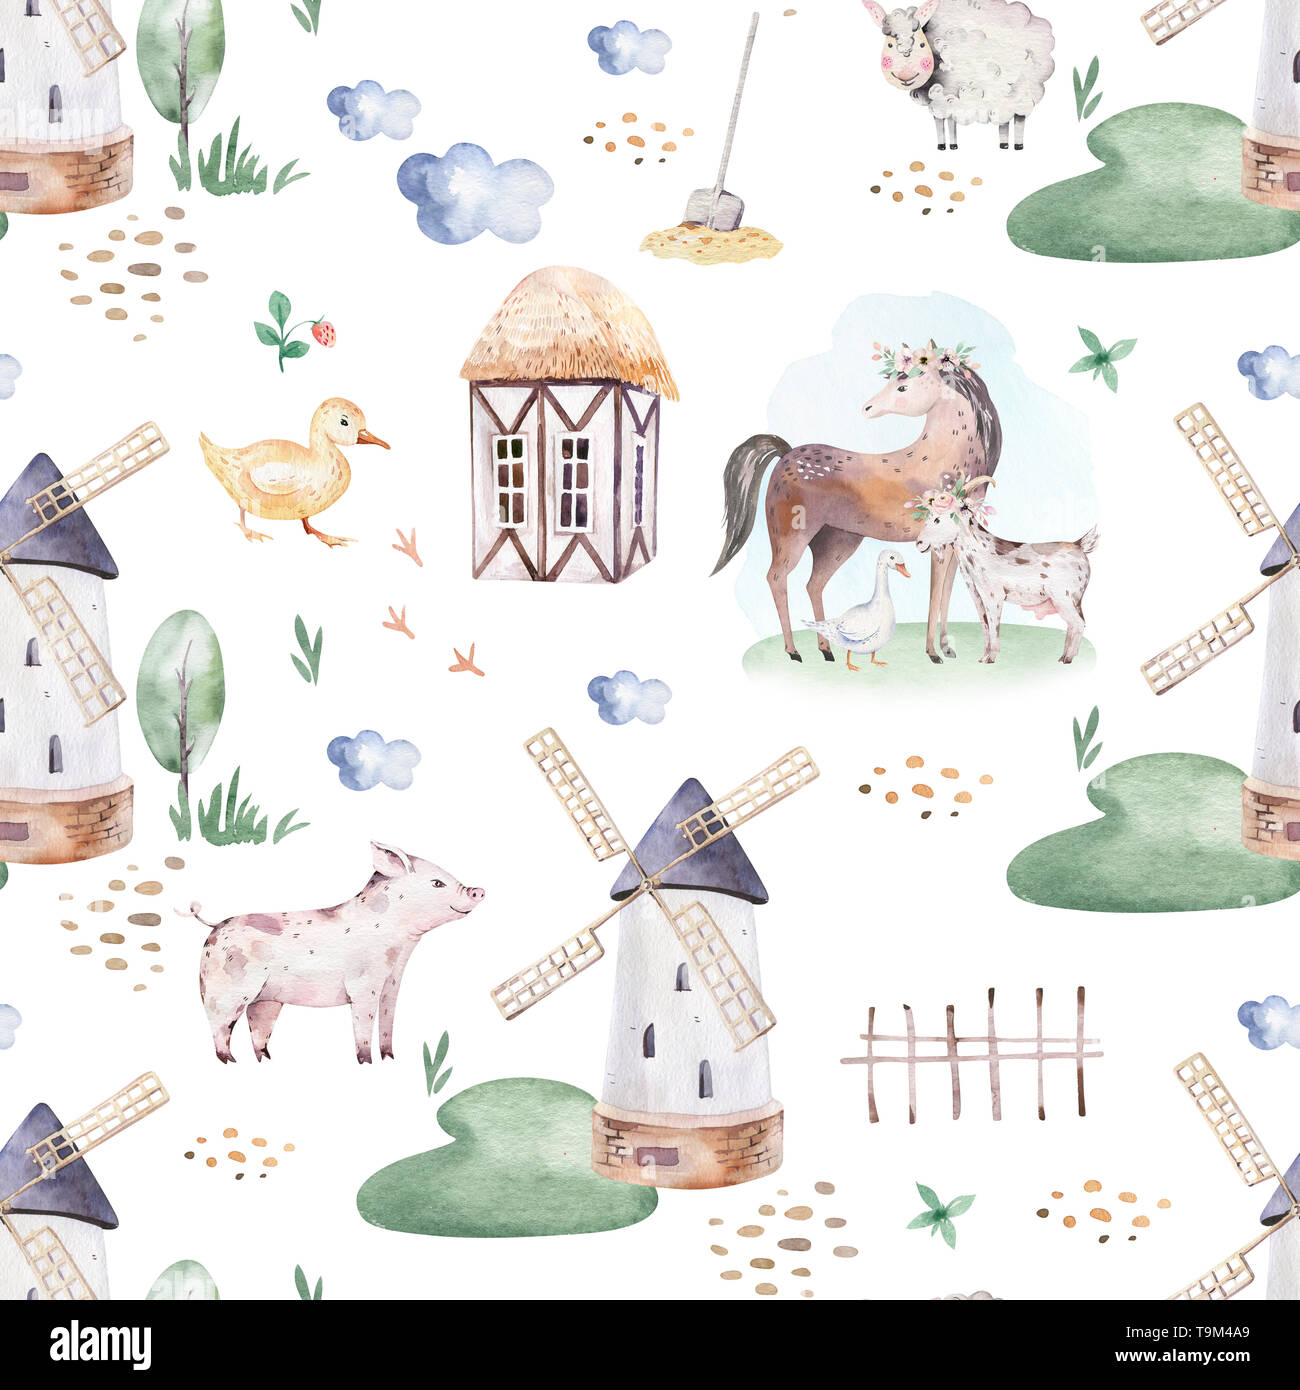 Watercolor seamless pattern with cute farm animals with goat, horse, goose and cow. chicken, sheep and pig domestic animal illustration. Stock Photo